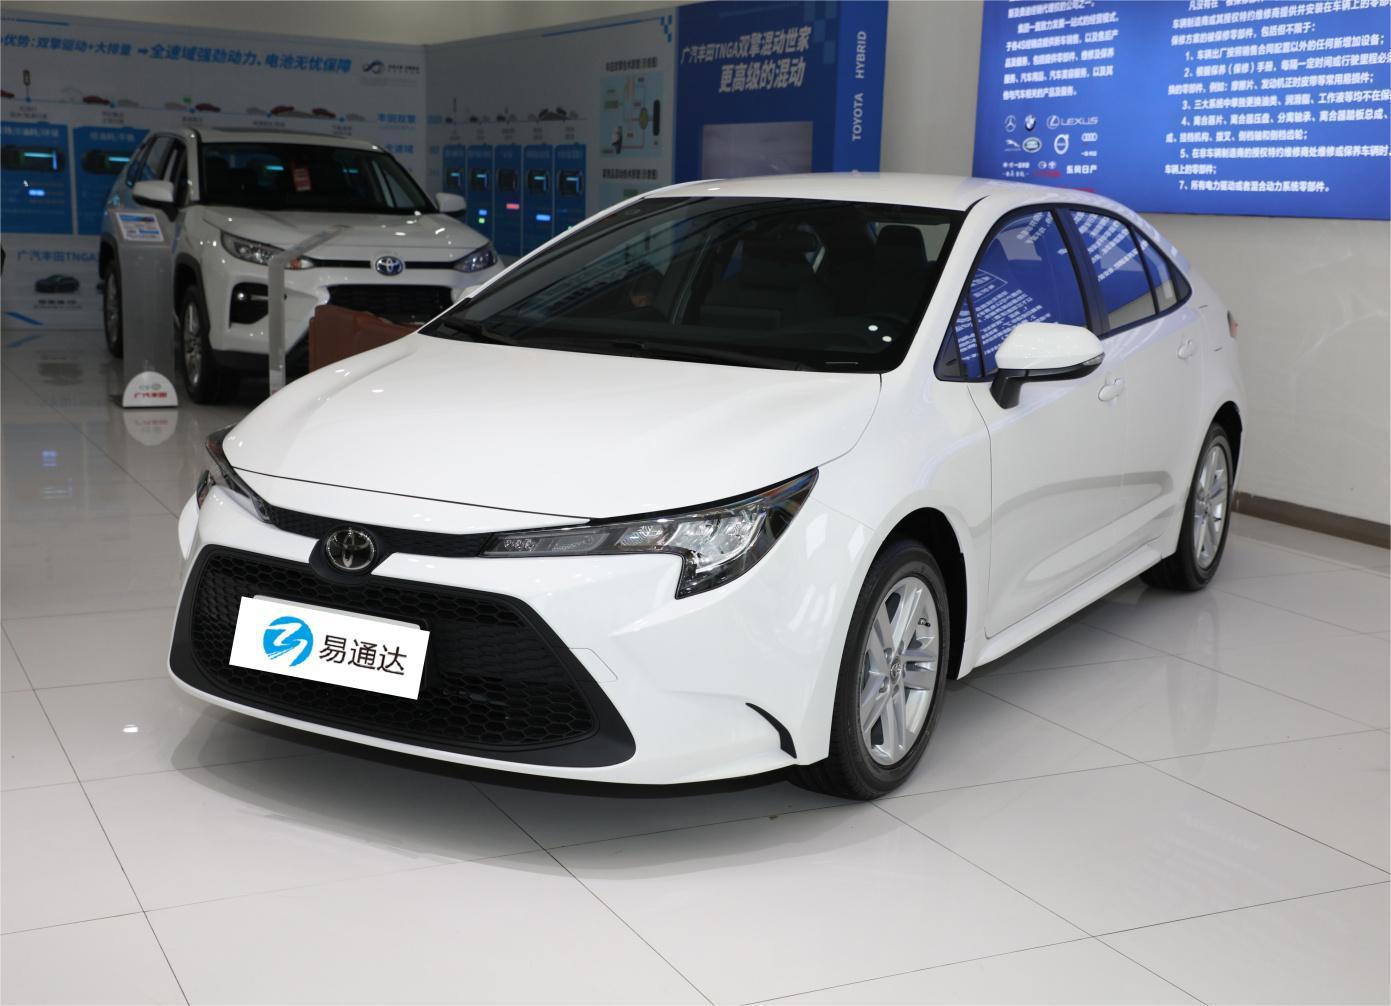 Toyota Leiling fuel gas saving cars cars with good gas mileage Hybrid Electrical Vehicle